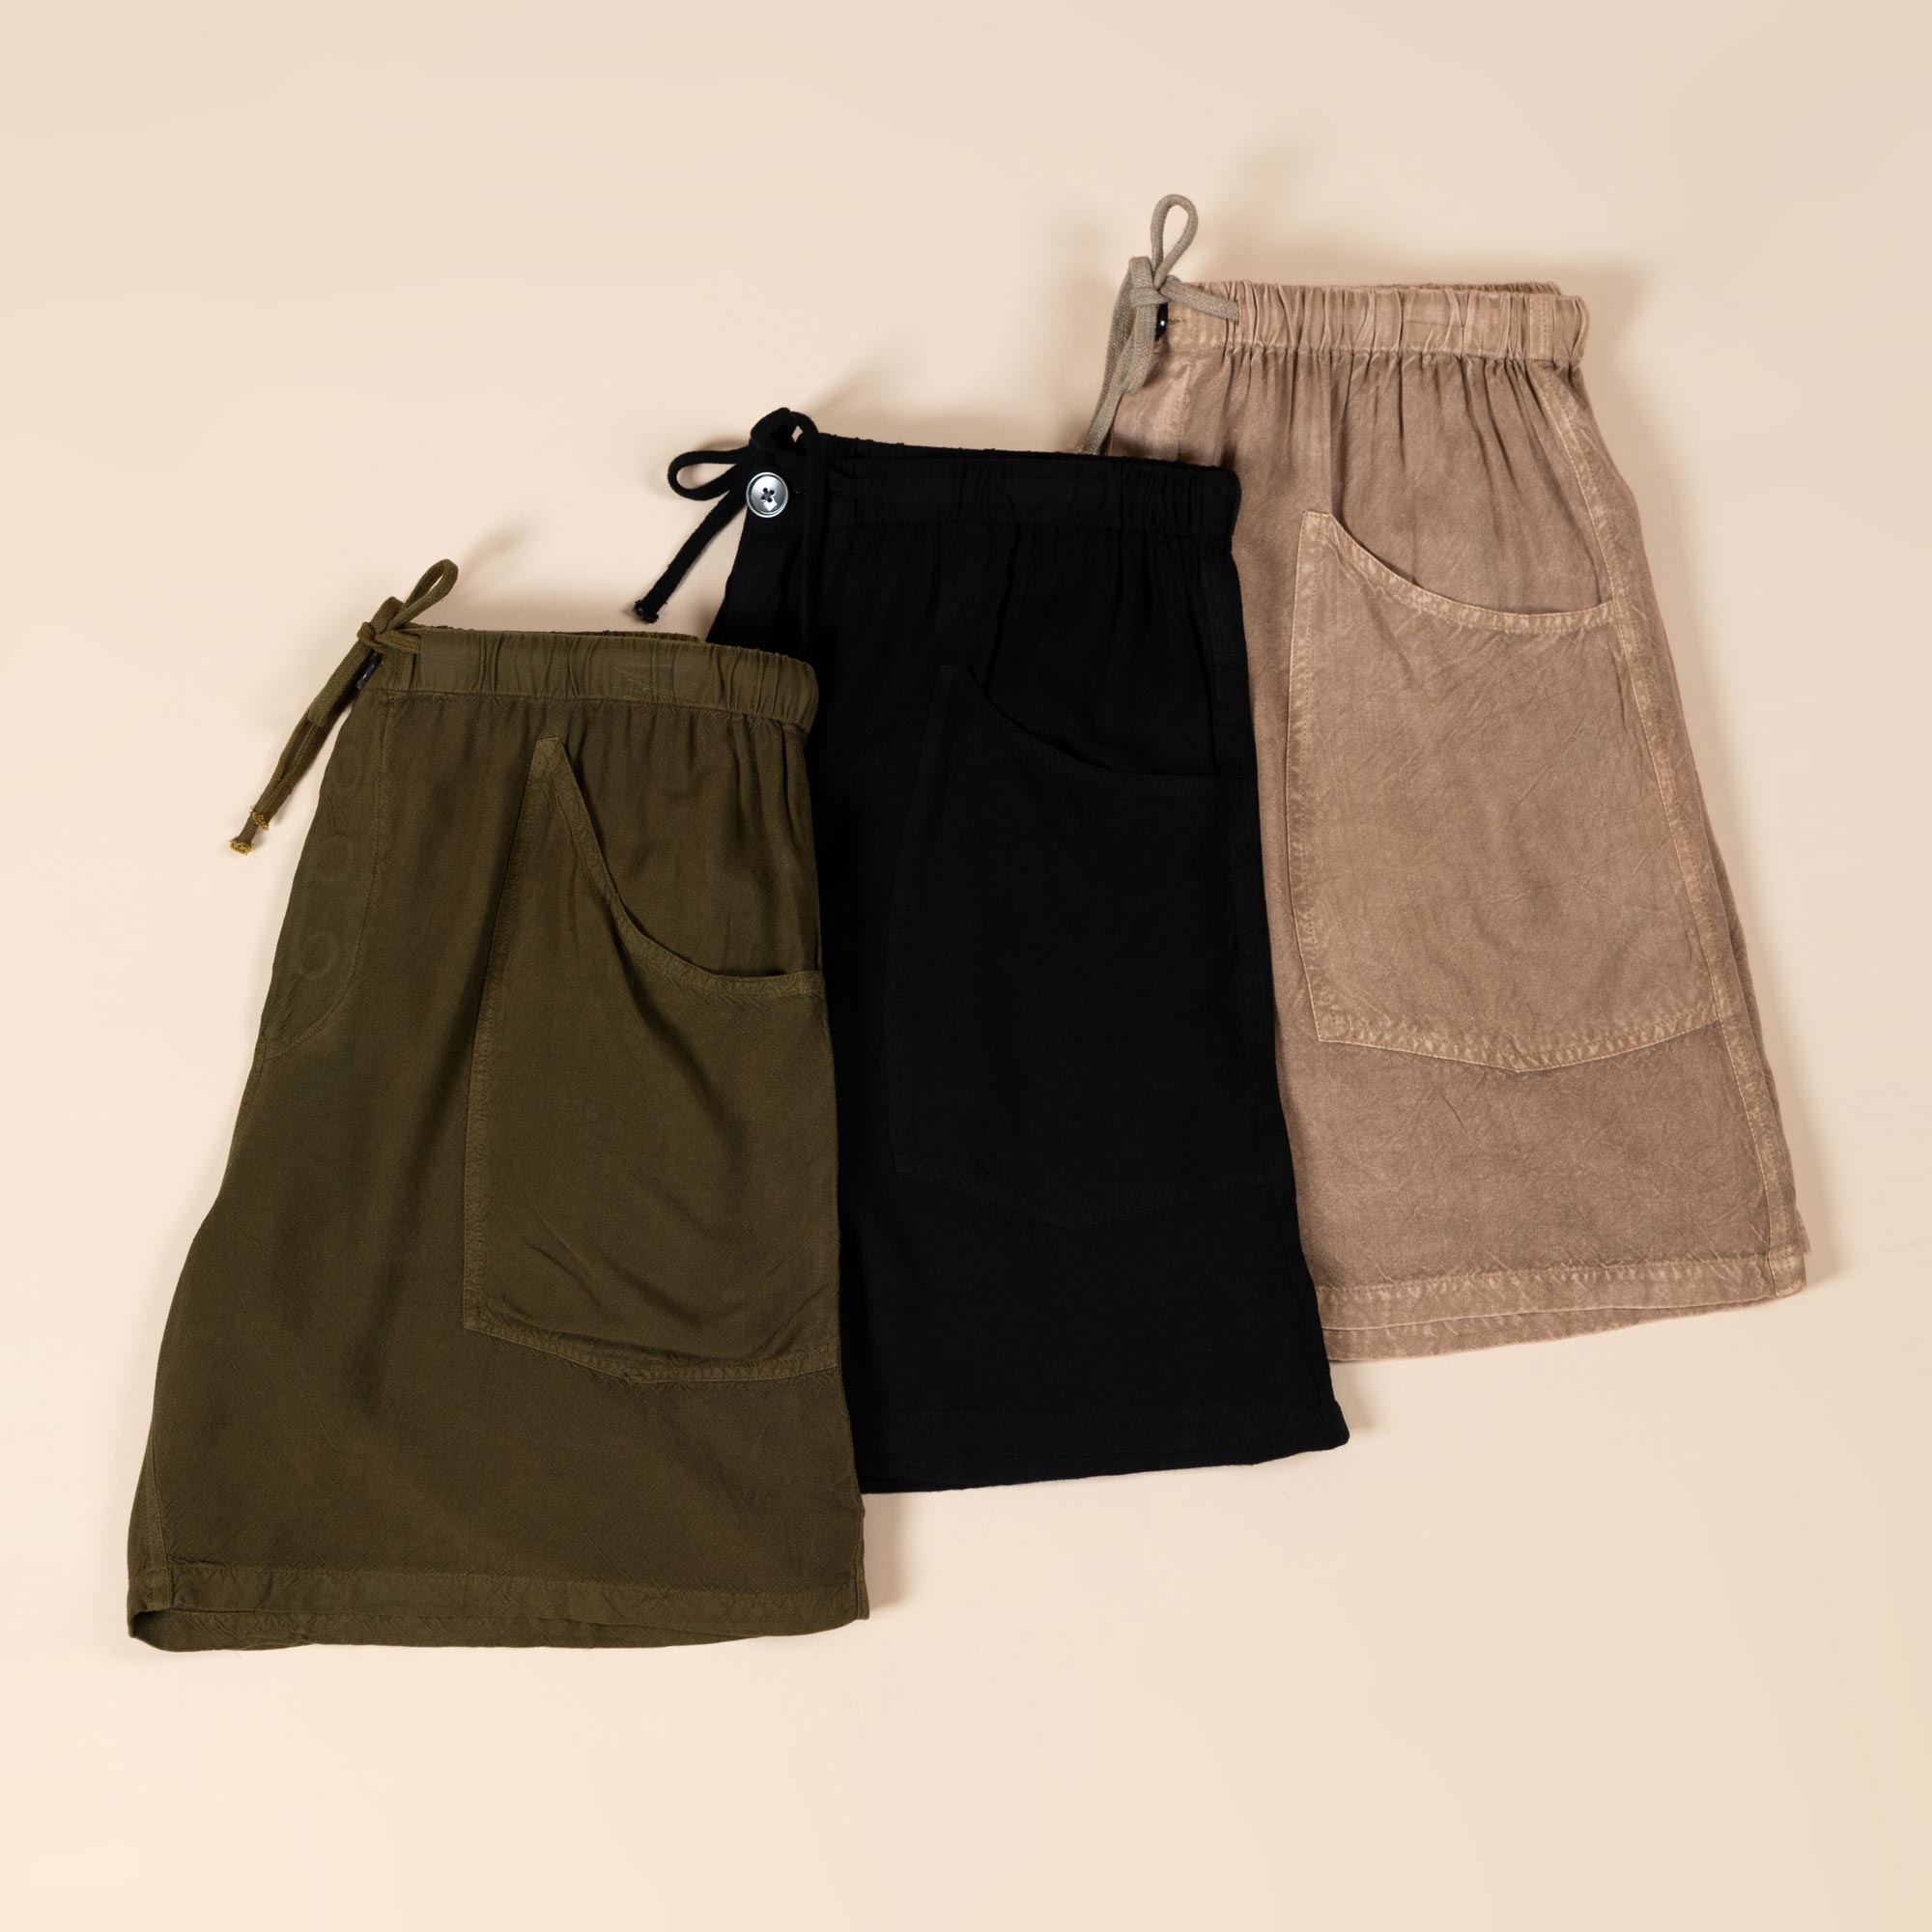 Three pair of solid-colored earth tone shorts